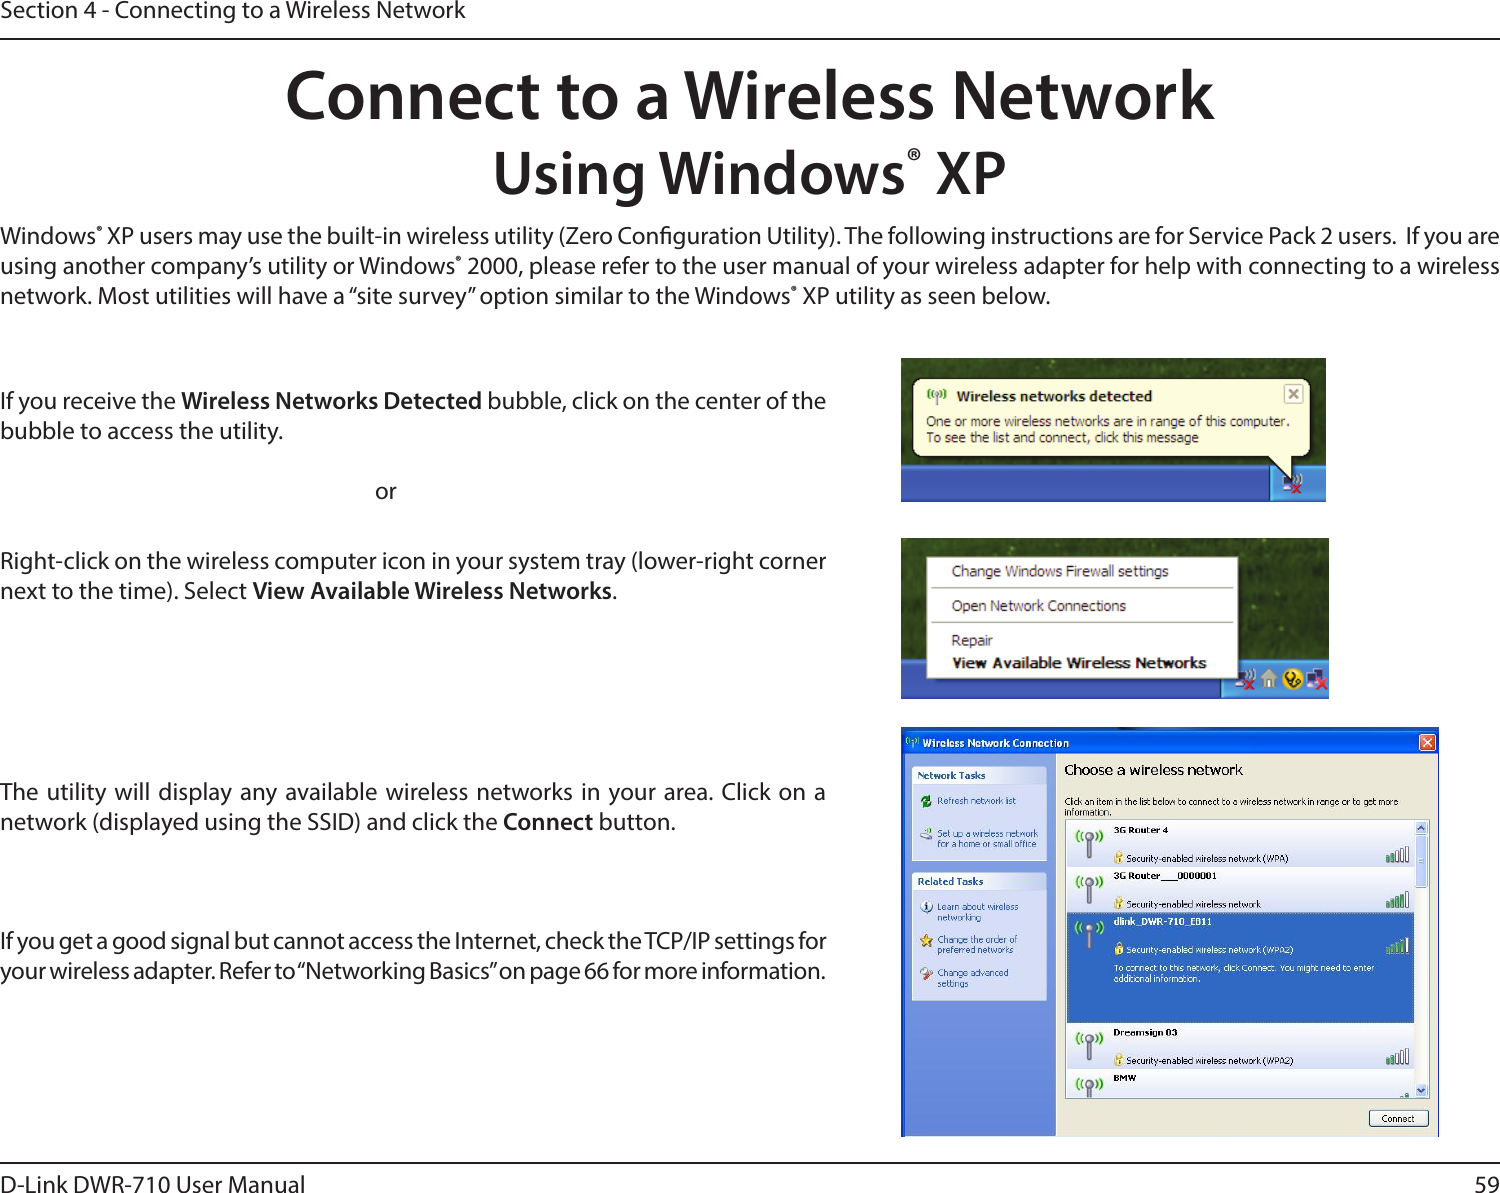 59D-Link DWR-710 User ManualSection 4 - Connecting to a Wireless NetworkConnect to a Wireless NetworkUsing Windows® XPWindows® XP users may use the built-in wireless utility (Zero Conguration Utility). The following instructions are for Service Pack 2 users.  If you are using another company’s utility or Windows® 2000, please refer to the user manual of your wireless adapter for help with connecting to a wireless network. Most utilities will have a “site survey” option similar to the Windows® XP utility as seen below.Right-click on the wireless computer icon in your system tray (lower-right corner next to the time). Select View Available Wireless Networks.If you receive the Wireless Networks Detected bubble, click on the center of the bubble to access the utility.     orThe utility will display any available wireless networks in your area. Click on a network (displayed using the SSID) and click the Connect button.If you get a good signal but cannot access the Internet, check the TCP/IP settings for your wireless adapter. Refer to “Networking Basics” on page 66 for more information.